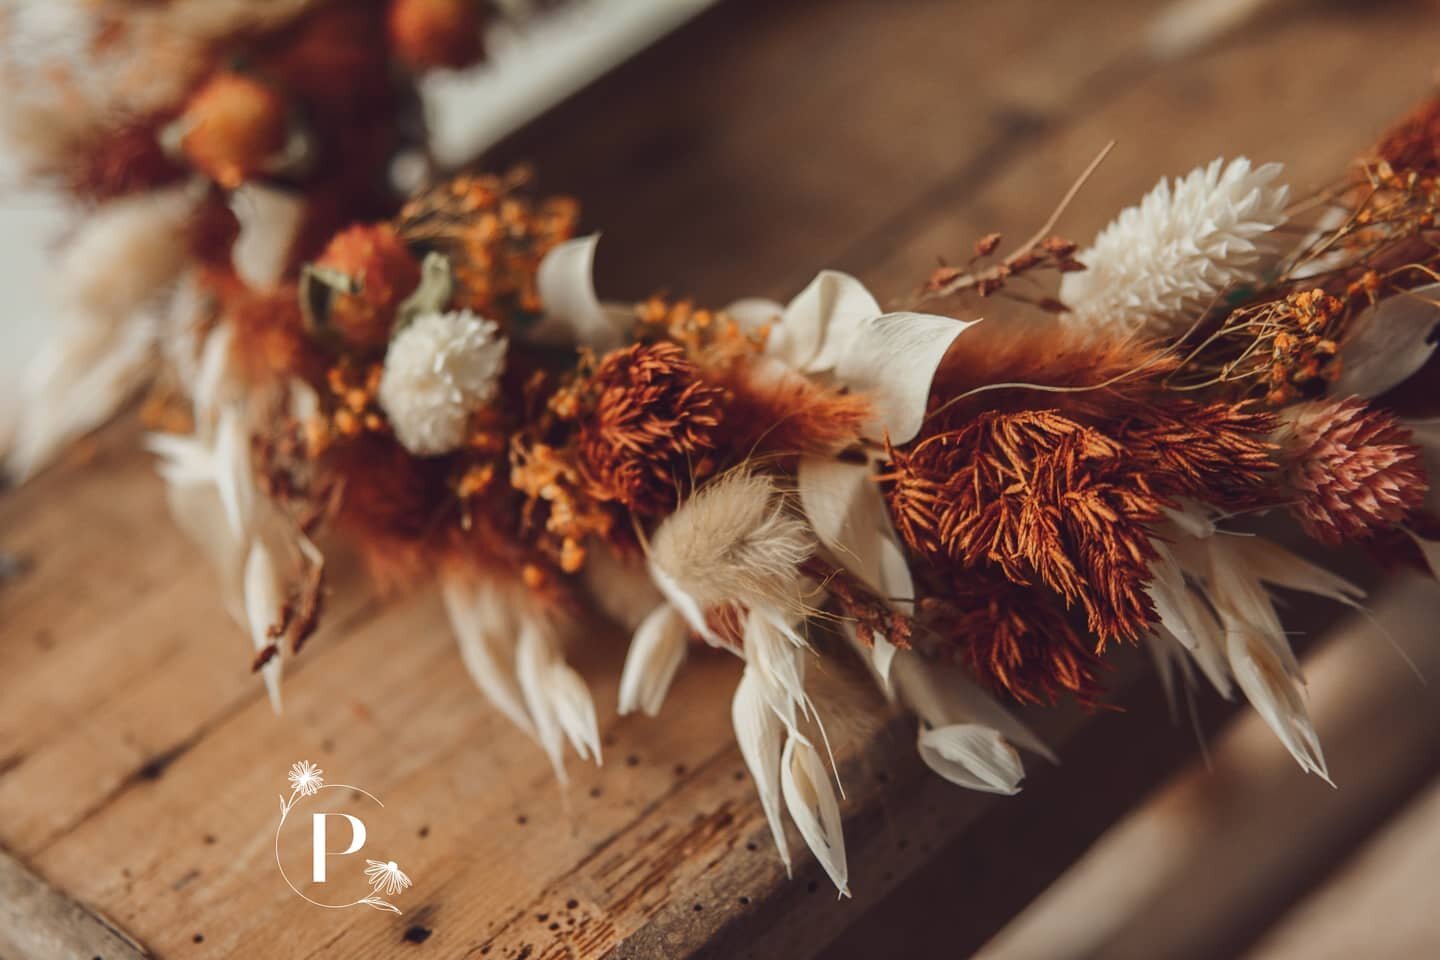 🧡🦊🍂🍊🔥
#orangevibes 
#floweraccessories 
Pic by @photography.by.patty